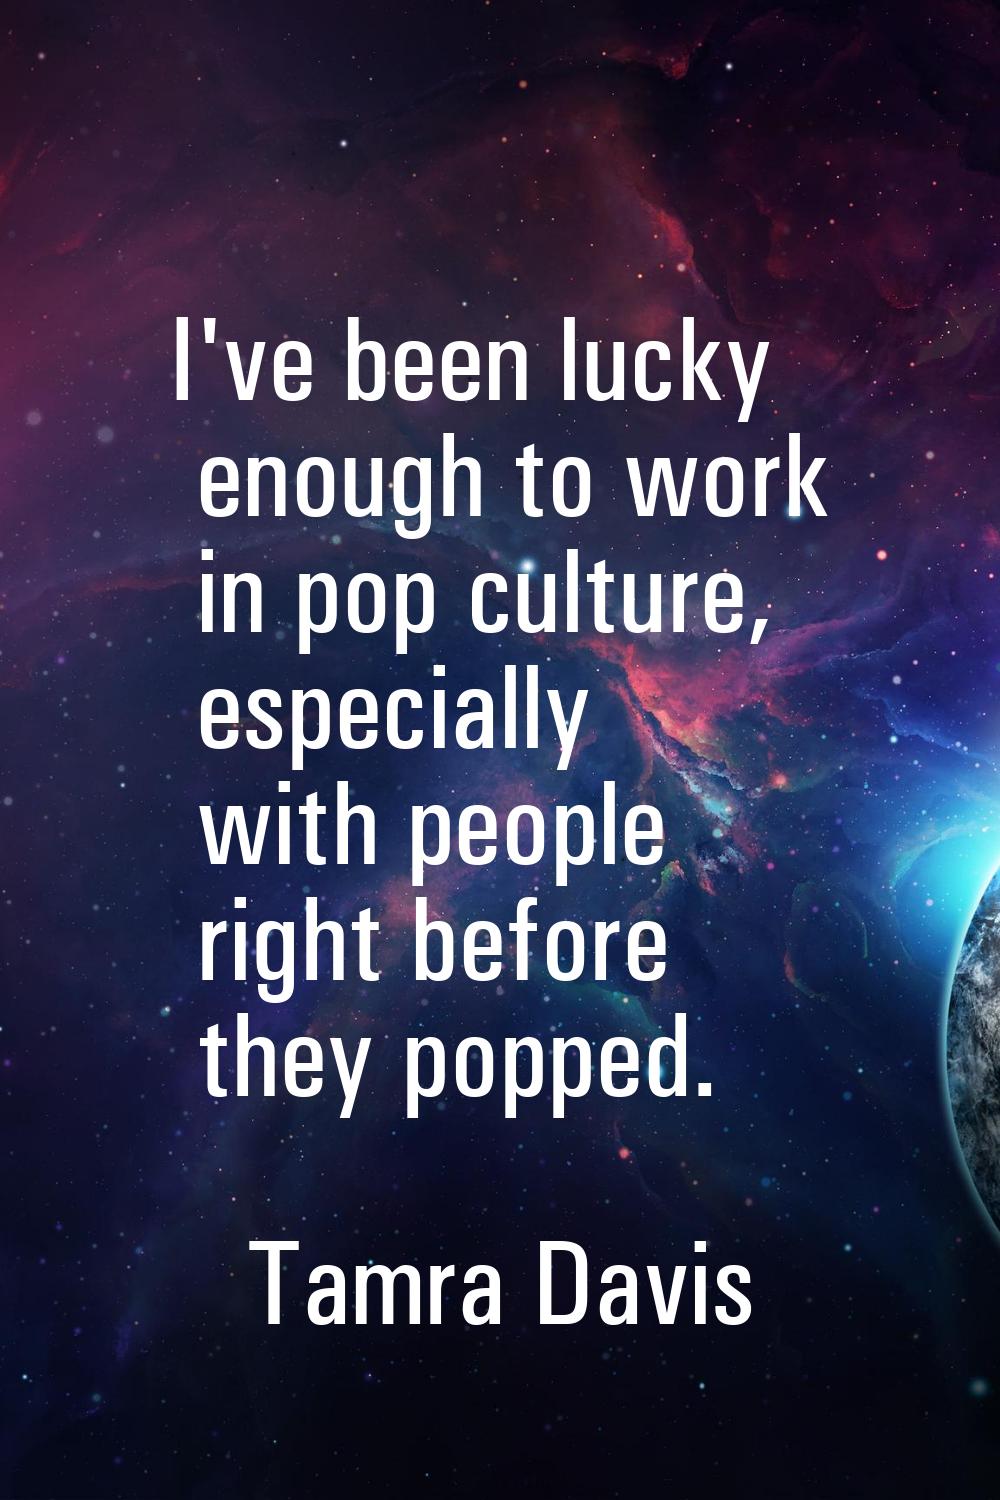 I've been lucky enough to work in pop culture, especially with people right before they popped.